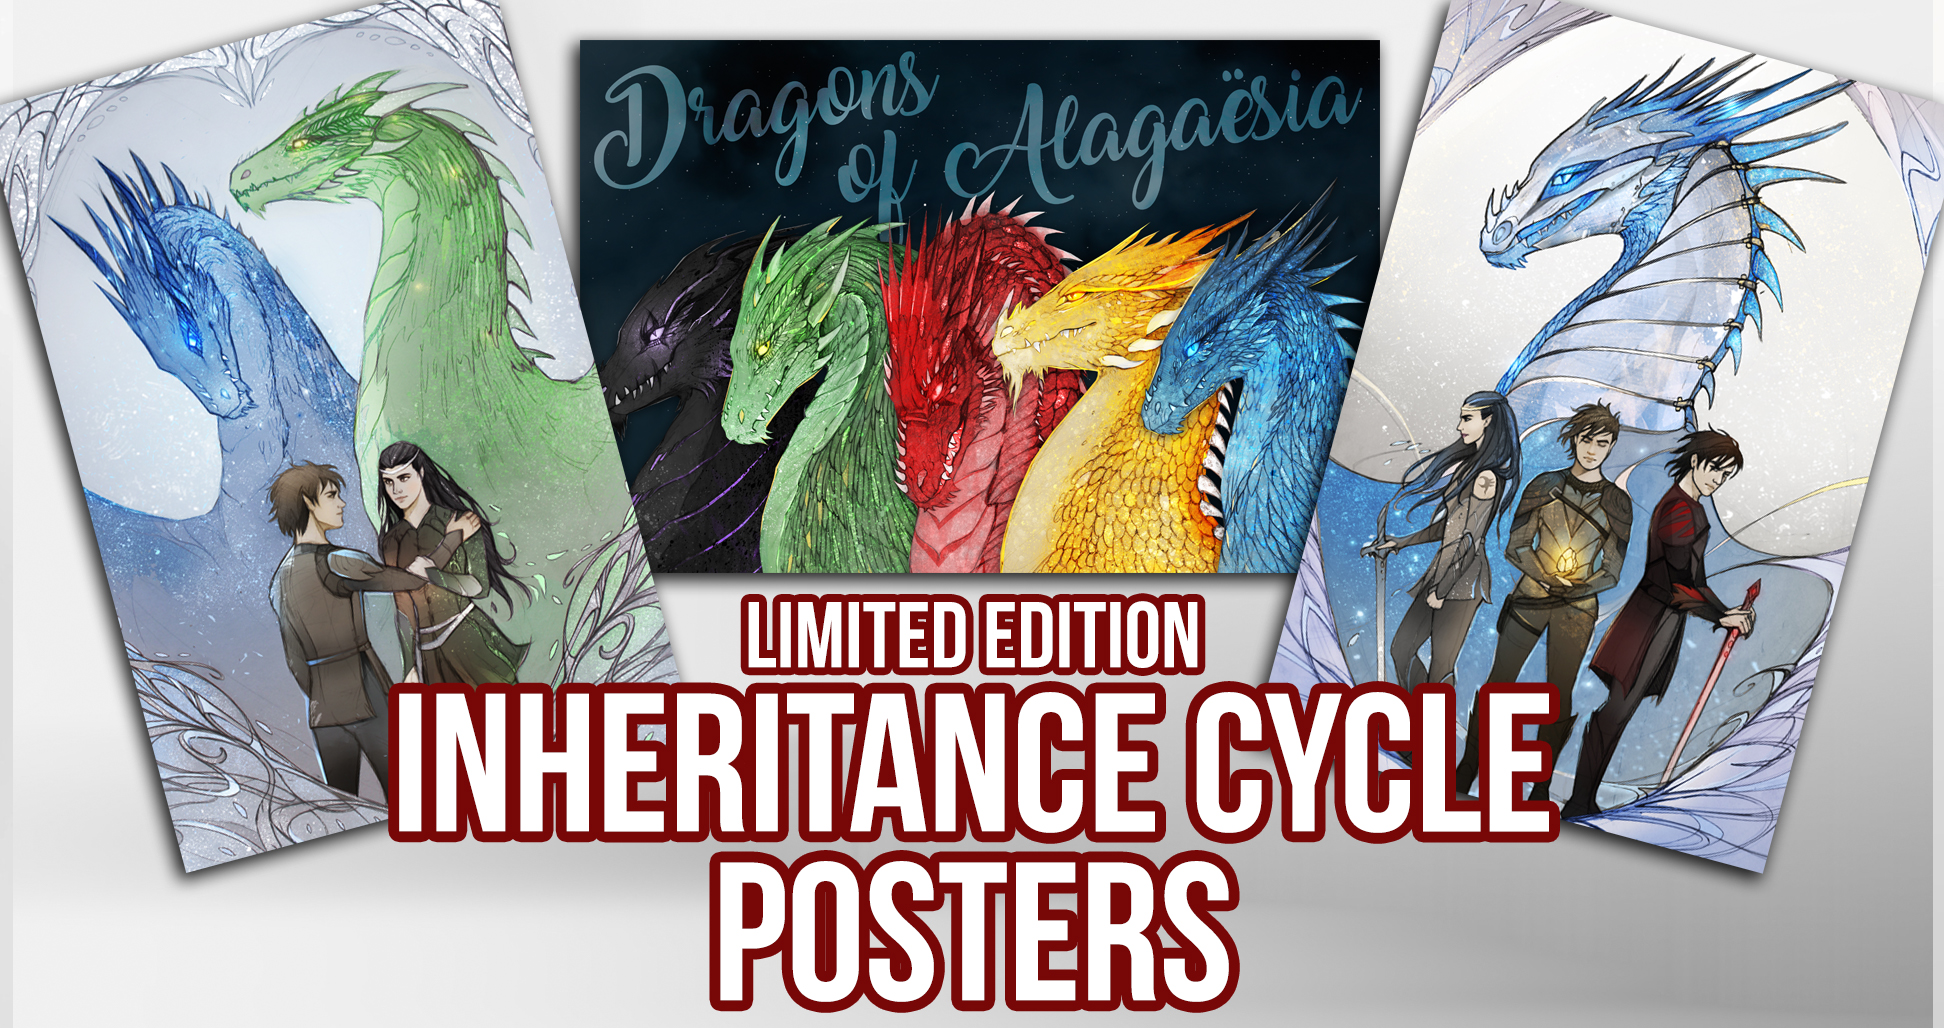 Our new art posters bring back the Riders and make Eragon/Arya finally happen!